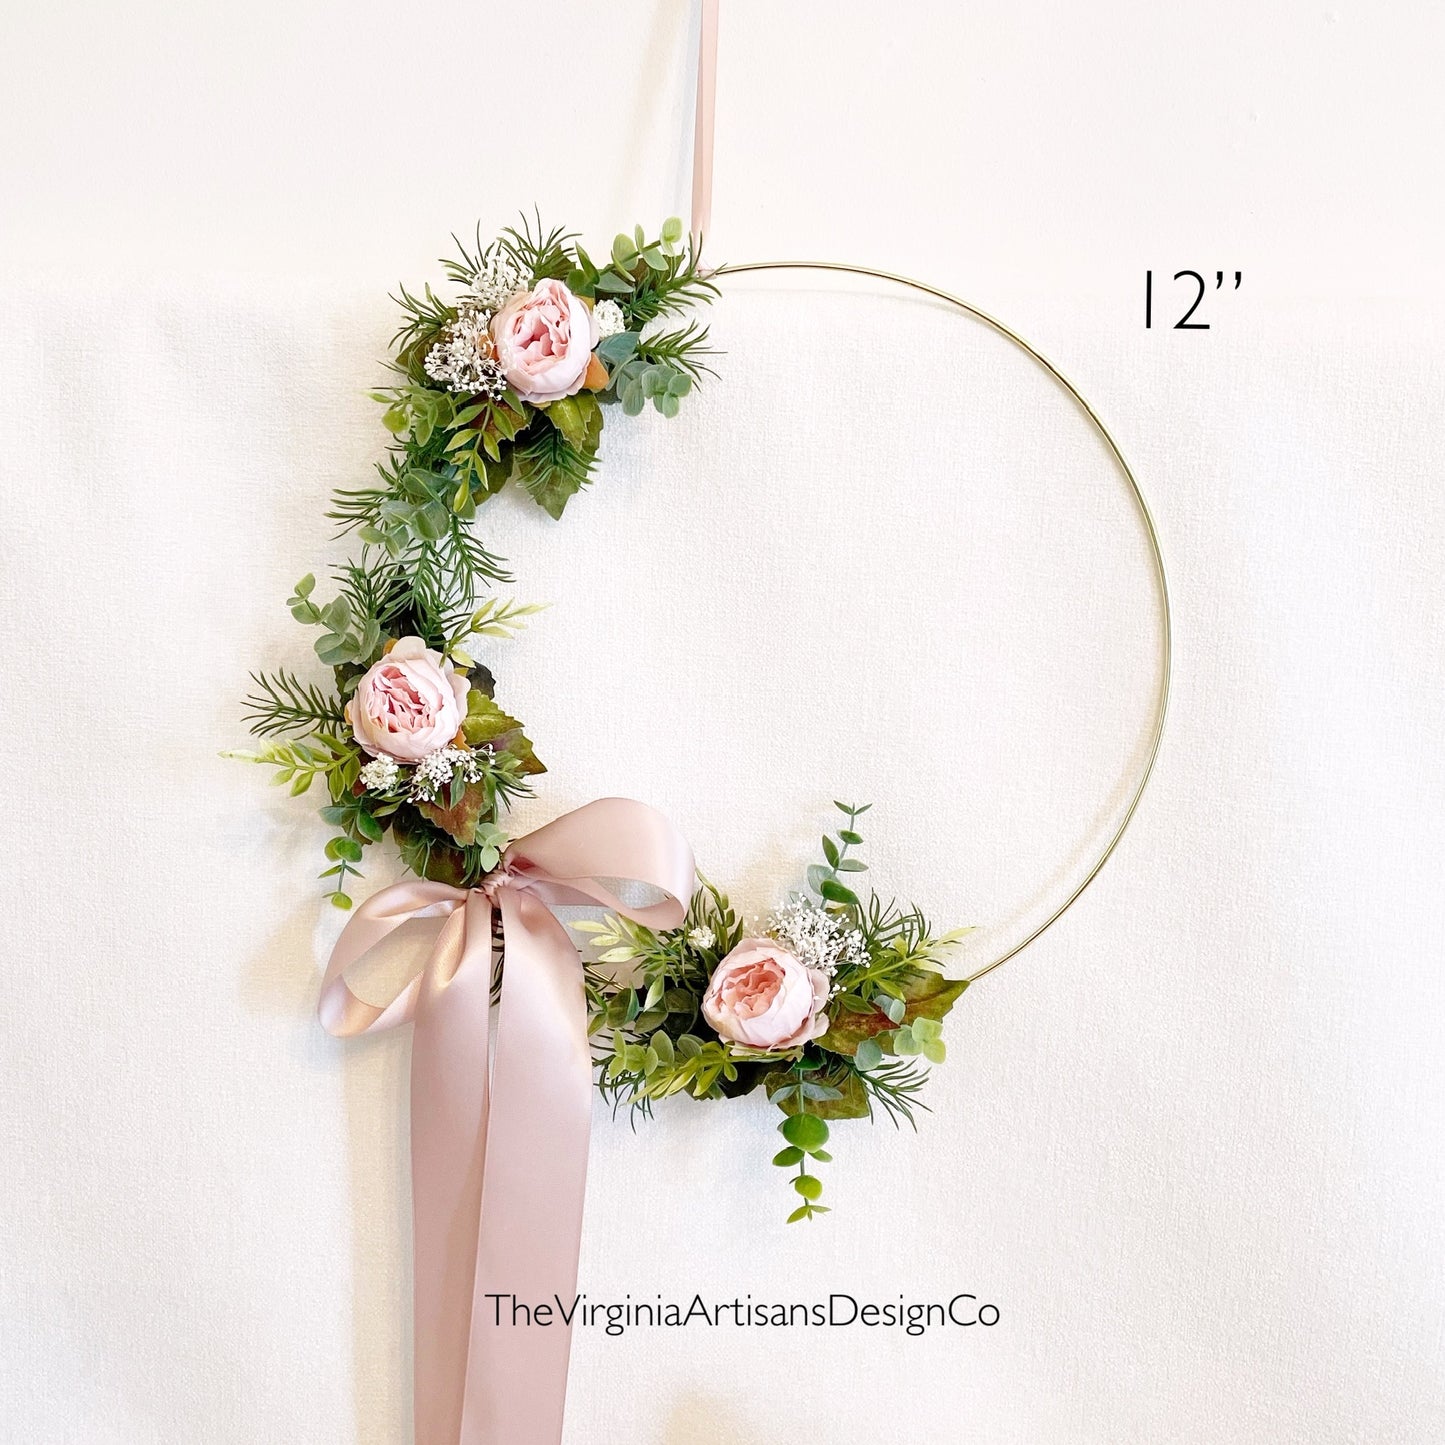 10 - 19 Inch Hoop Wreath White or Blush Peony Florals